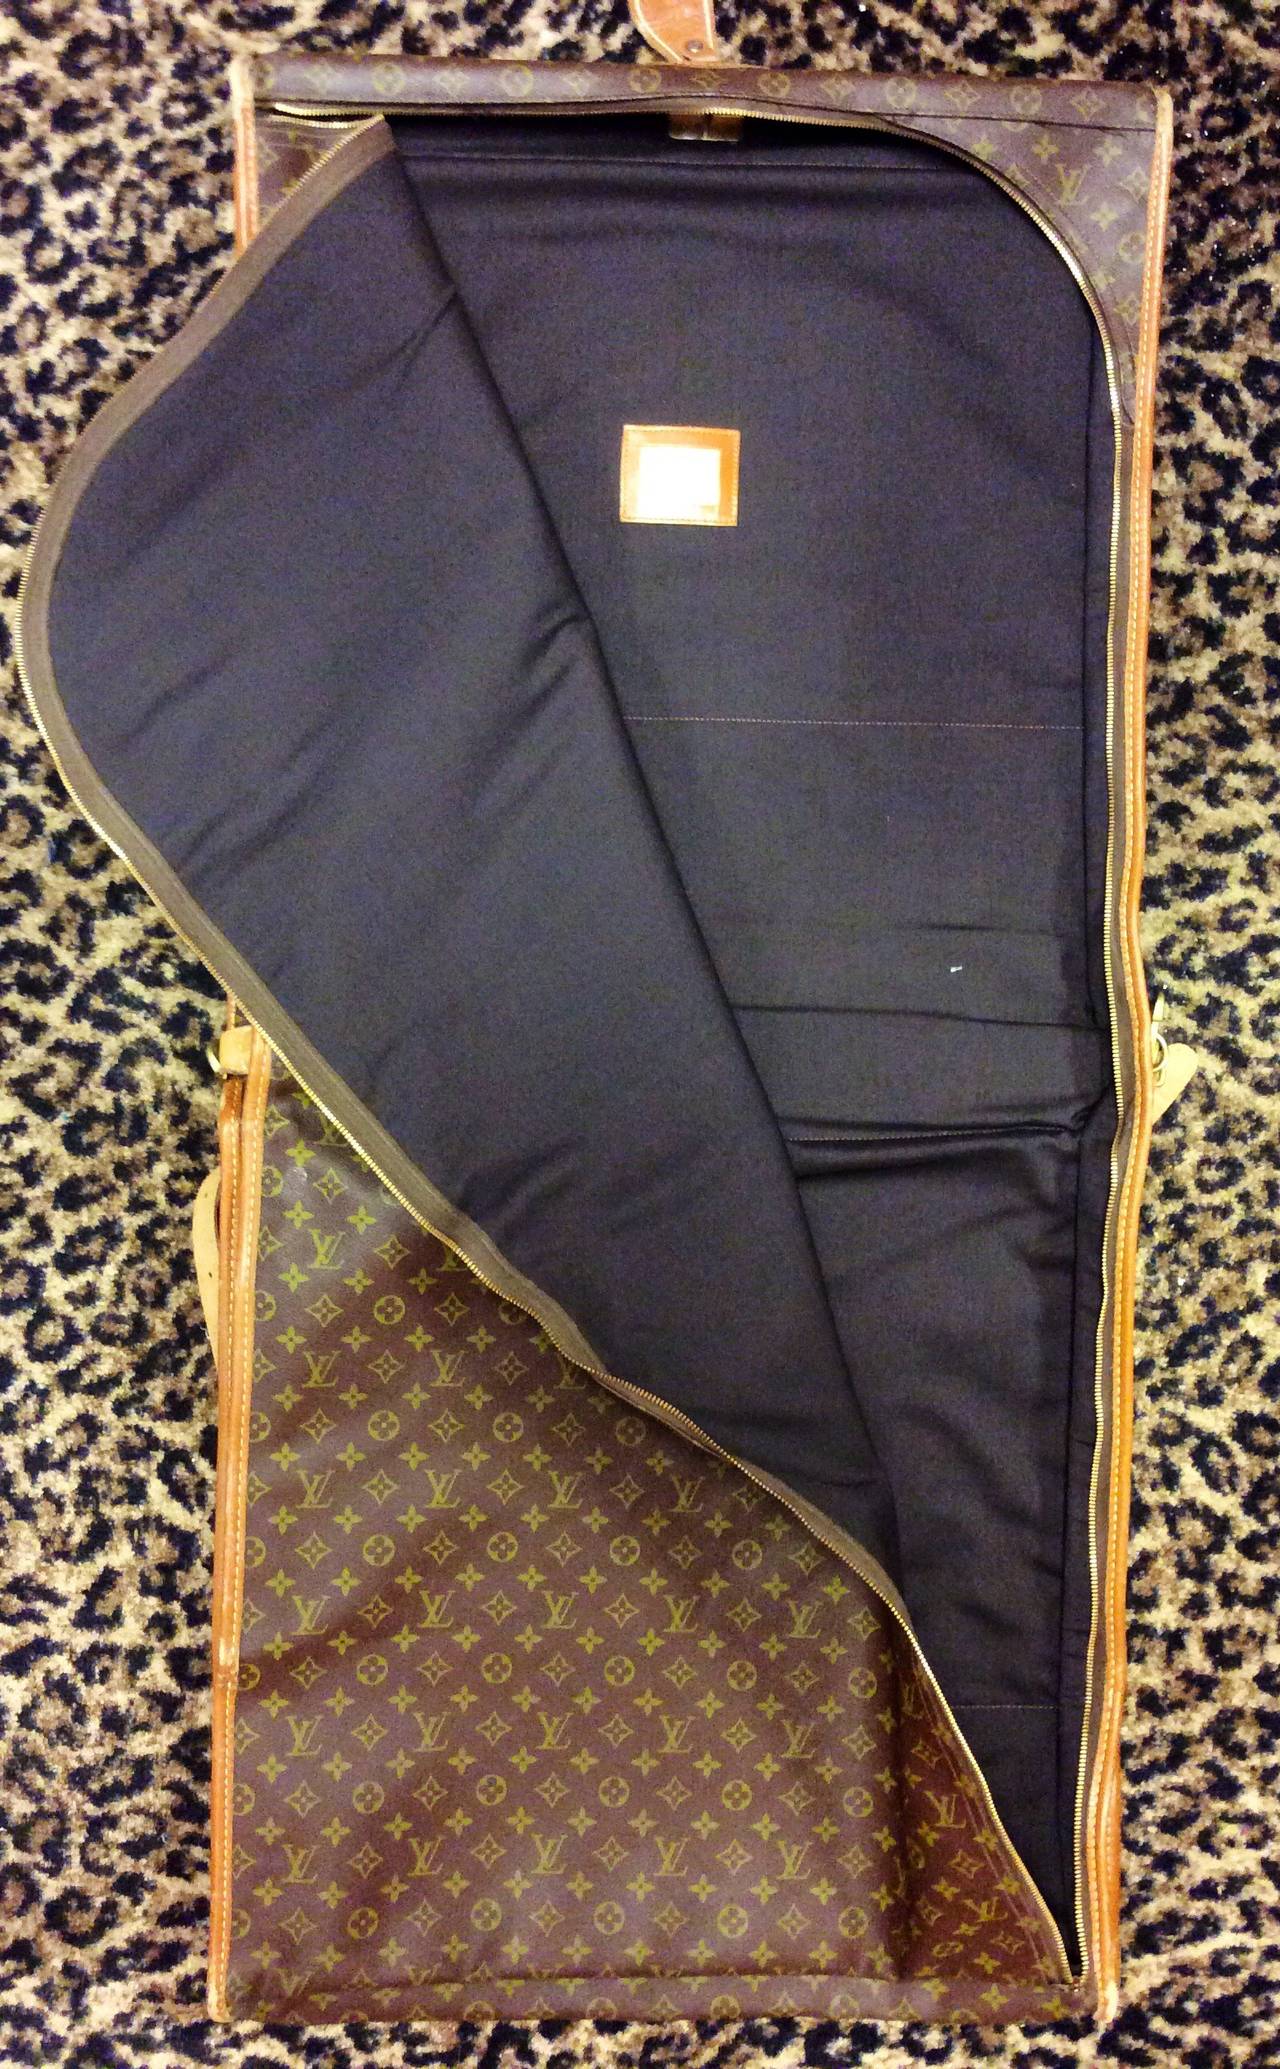 Vintage Rare Louis Vuitton French Company Garment Travel Bag In Fair Condition For Sale In Lake Park, FL